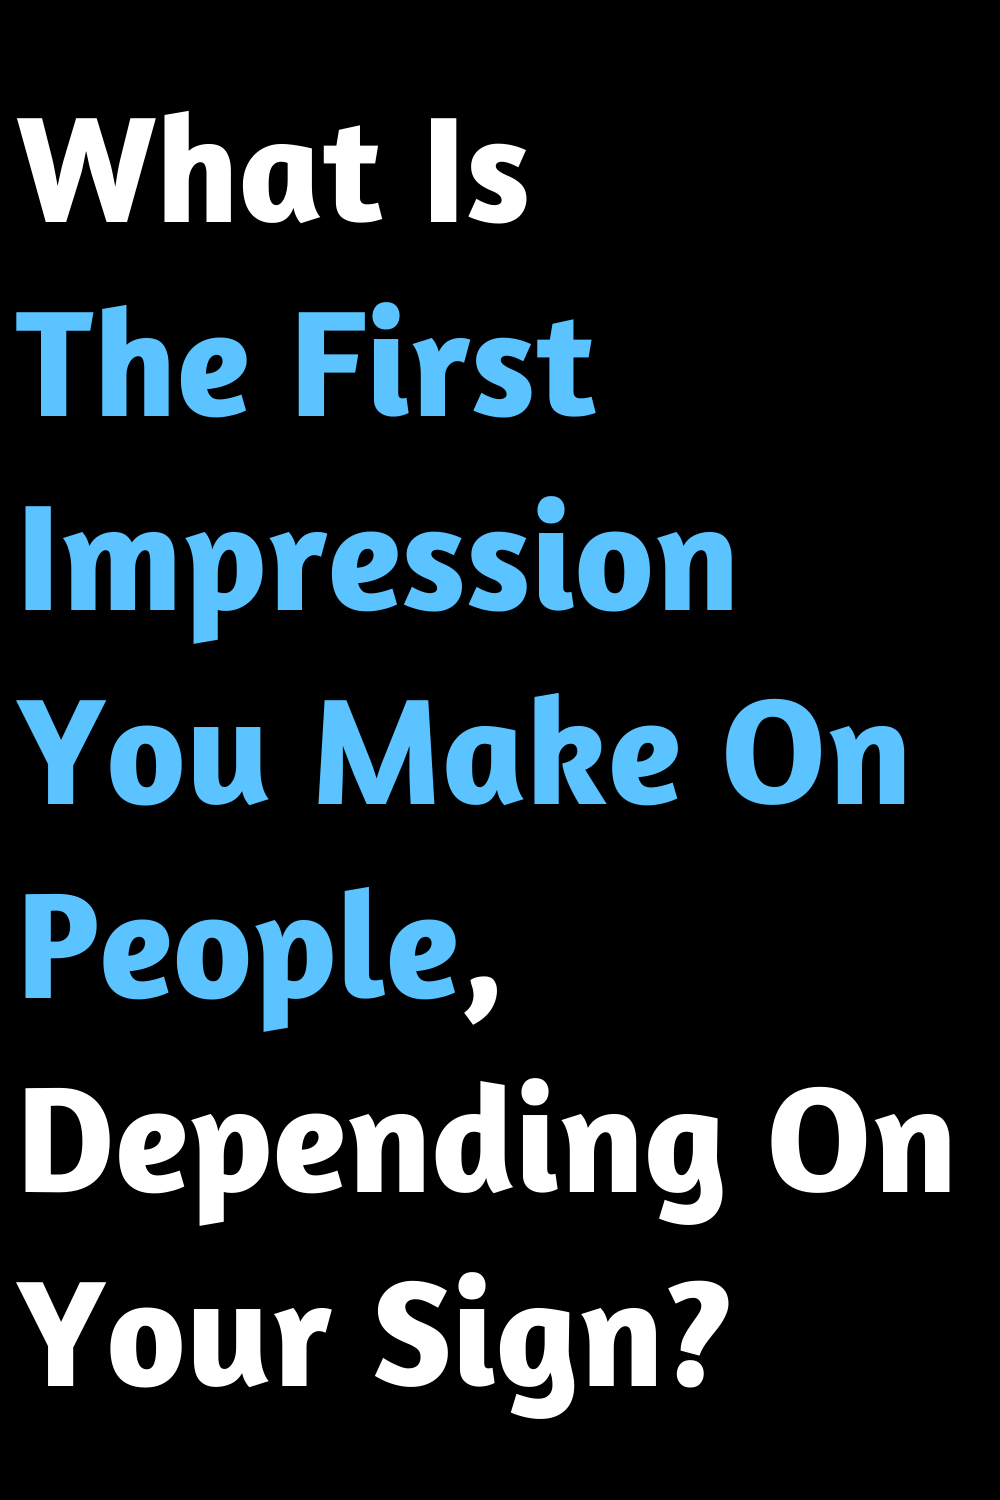 What Is The First Impression You Make On People, Depending On Your Sign?